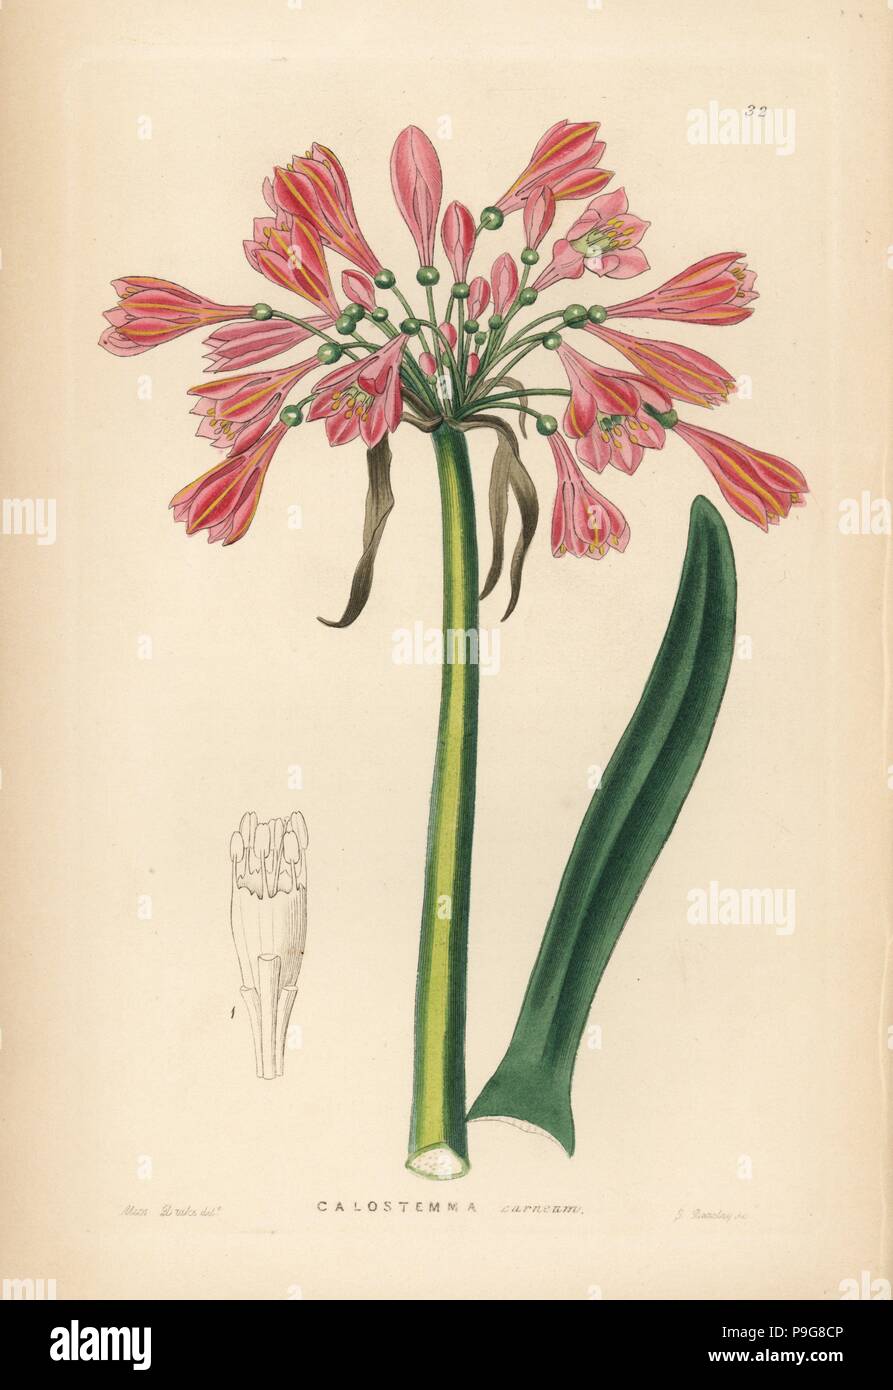 Garland lily, Calostemma purpureum (Flesh-coloured calostemma, Calostemma carneum). Handcoloured copperplate engraving by G. Barclay after Miss Sarah Drake from John Lindley and Robert Sweet's Ornamental Flower Garden and Shrubbery, G. Willis, London, 1854. Stock Photo